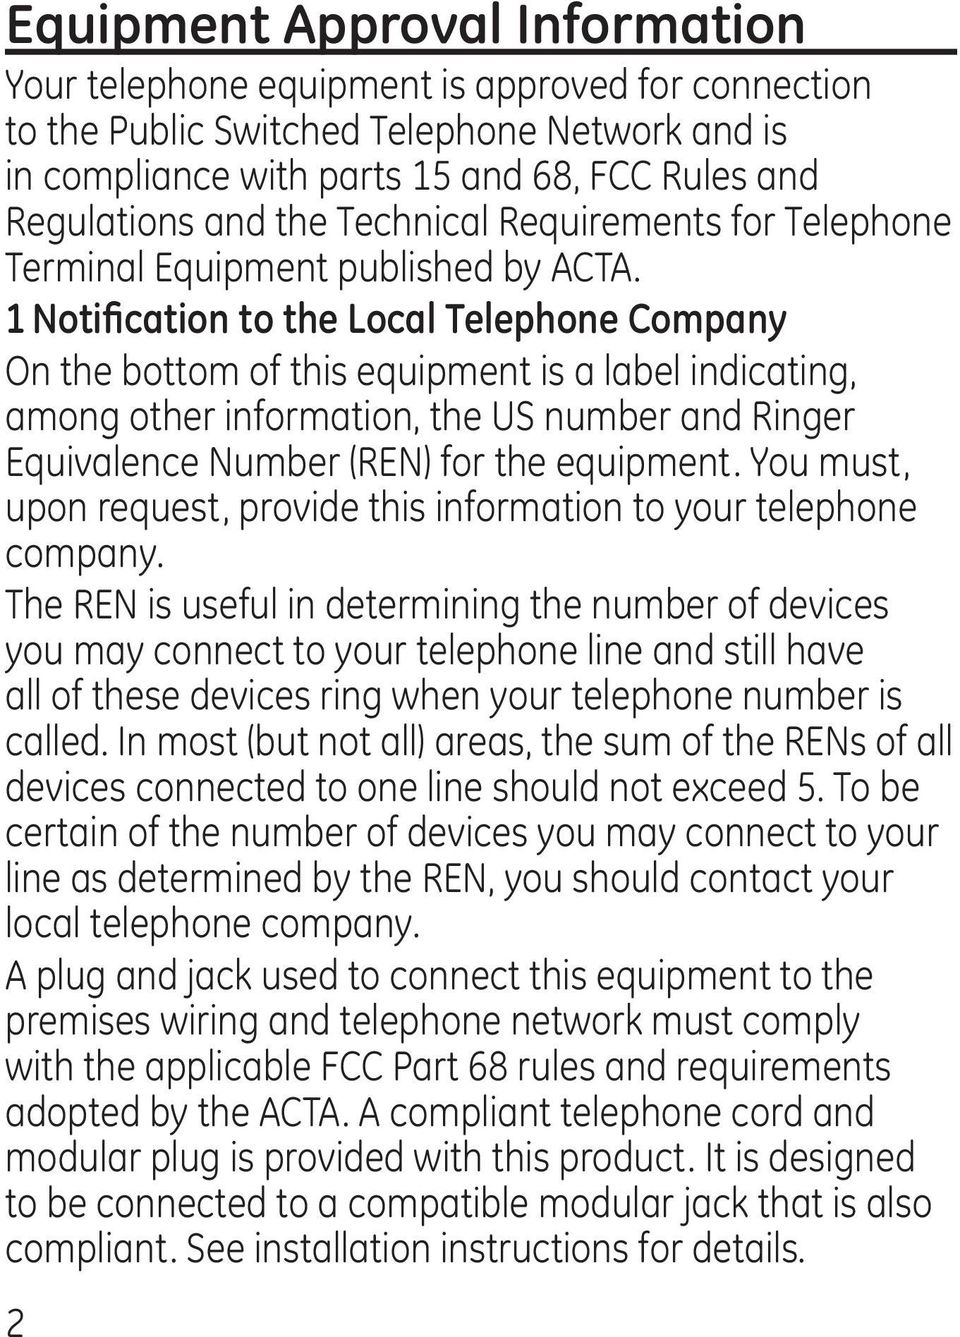 1 Notification to the Local Telephone Company On the bottom of this equipment is a label indicating, among other information, the US number and Ringer Equivalence Number (REN) for the equipment.